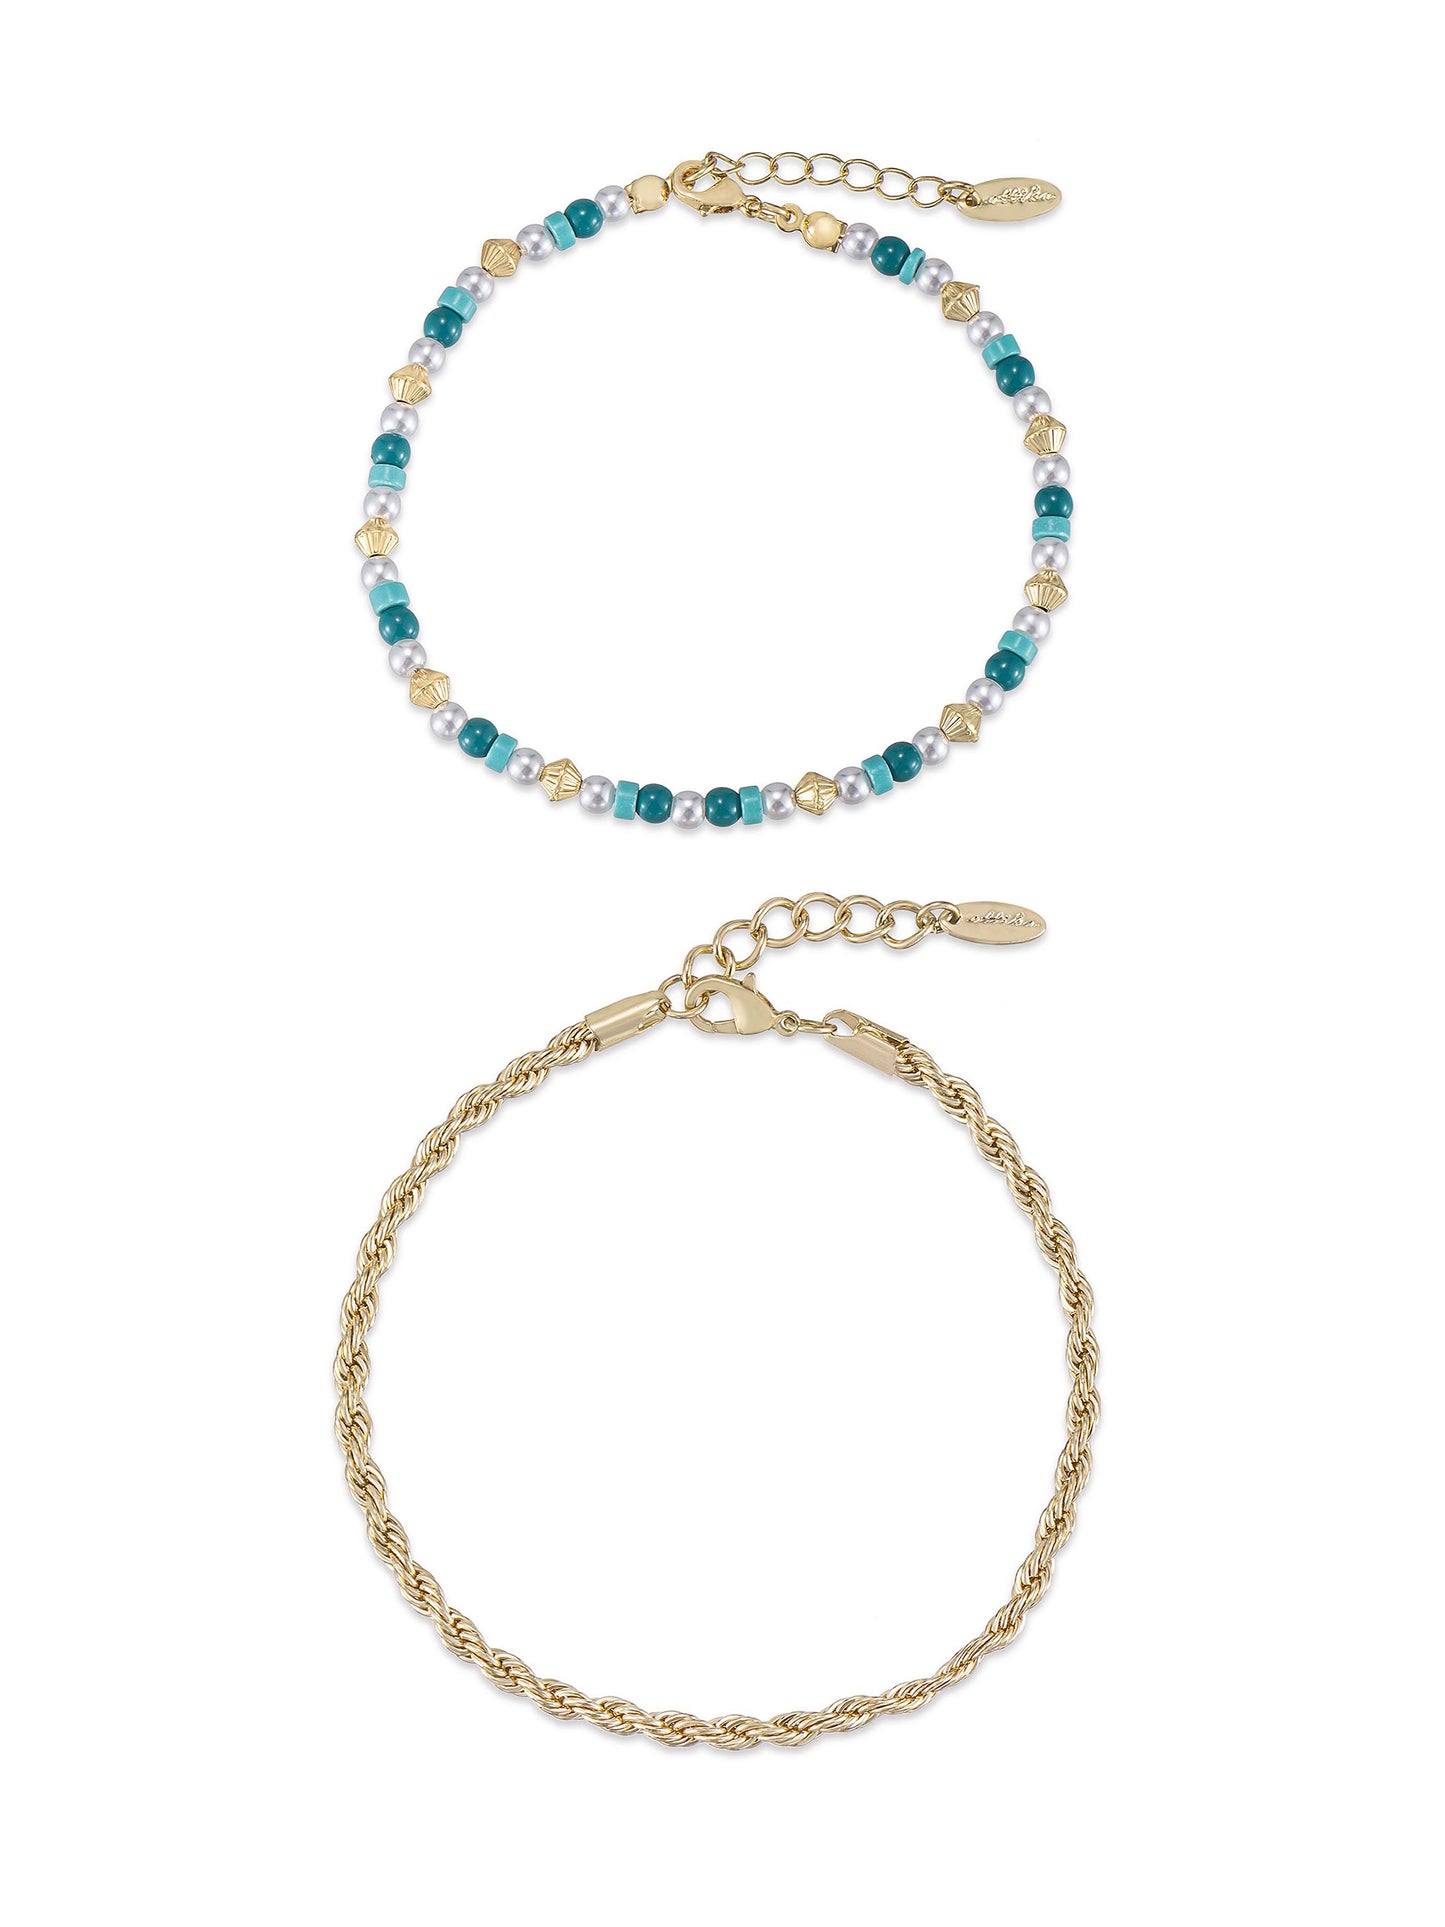 Seaside Turquoise and Pearl Anklet Set